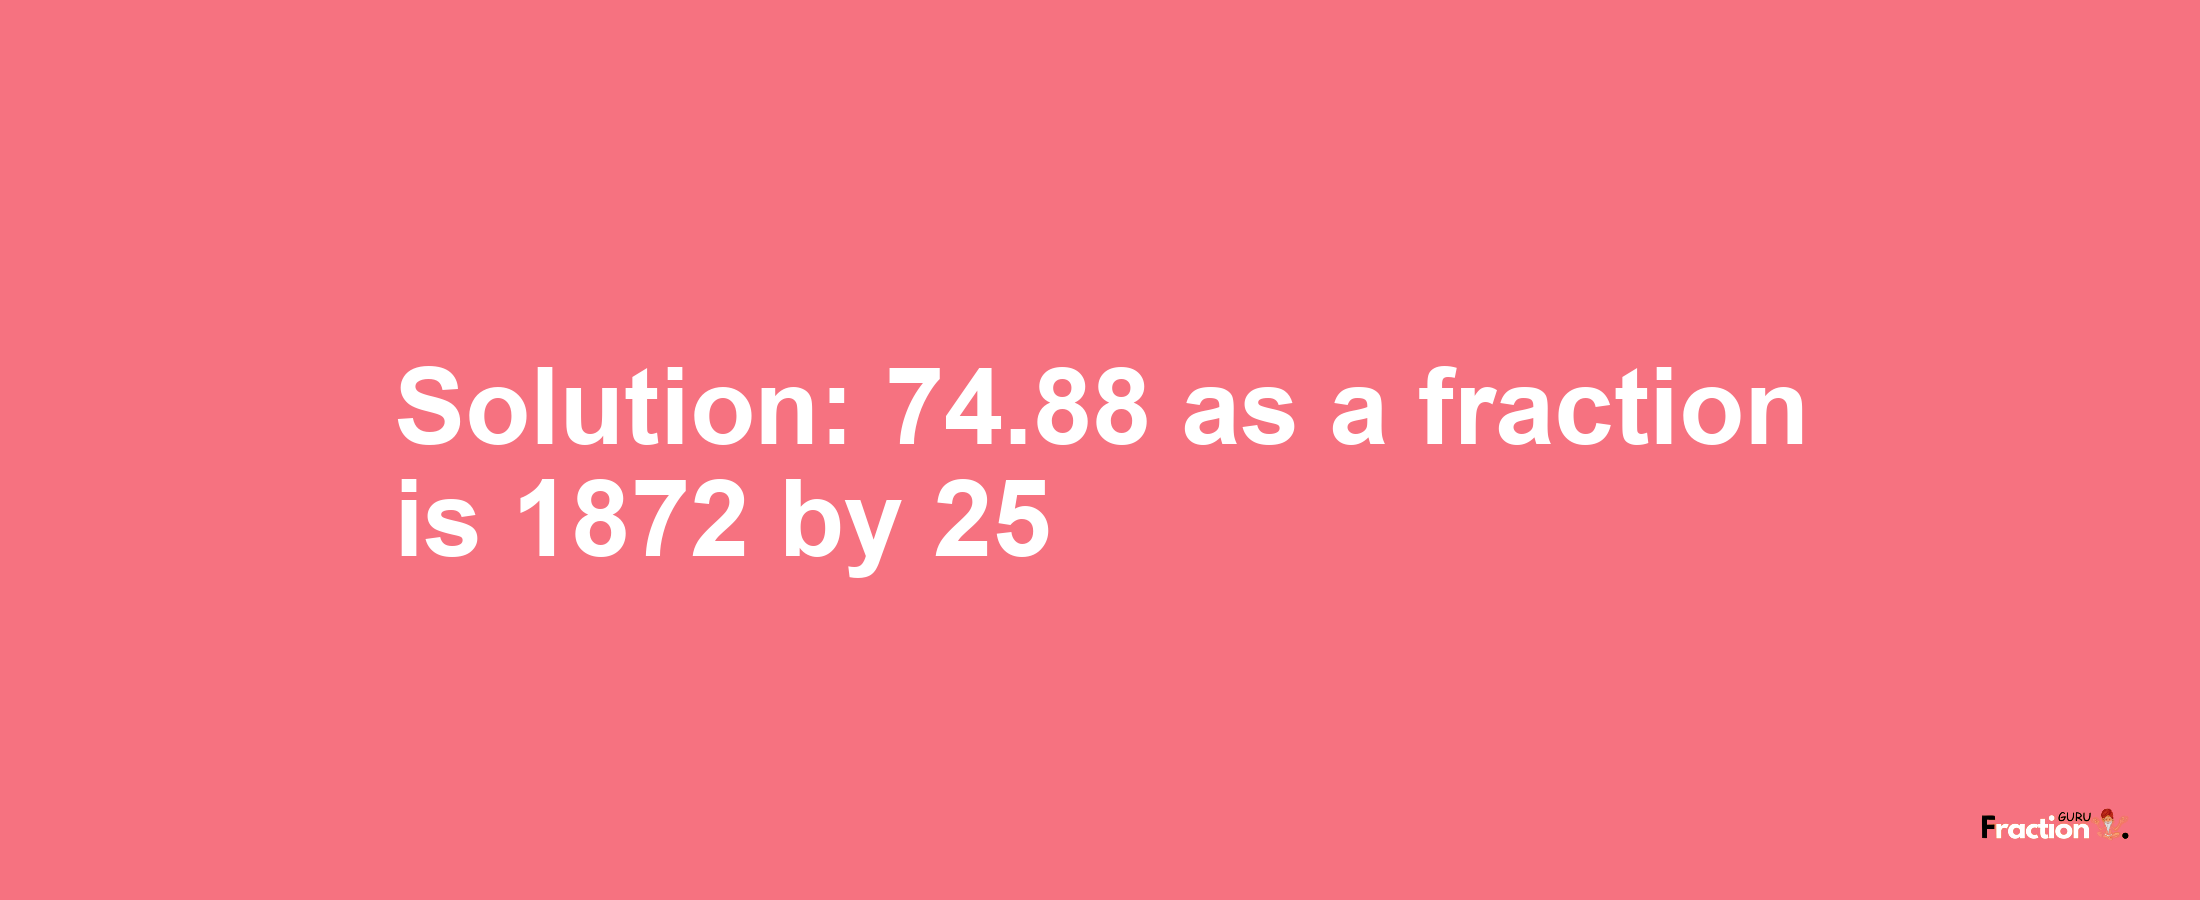 Solution:74.88 as a fraction is 1872/25